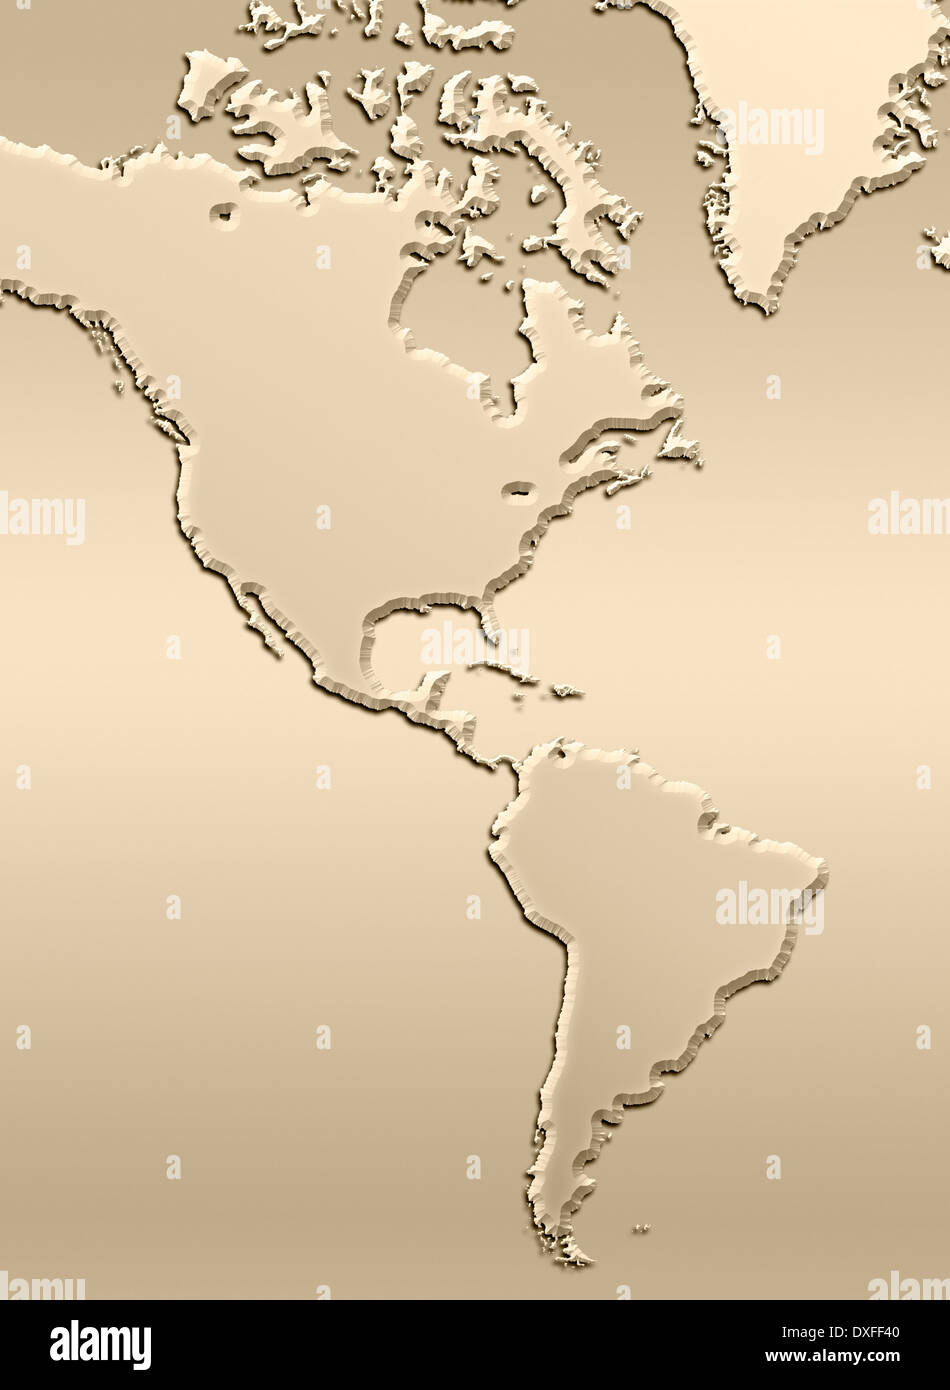 Outline map of North and South America Stock Photo